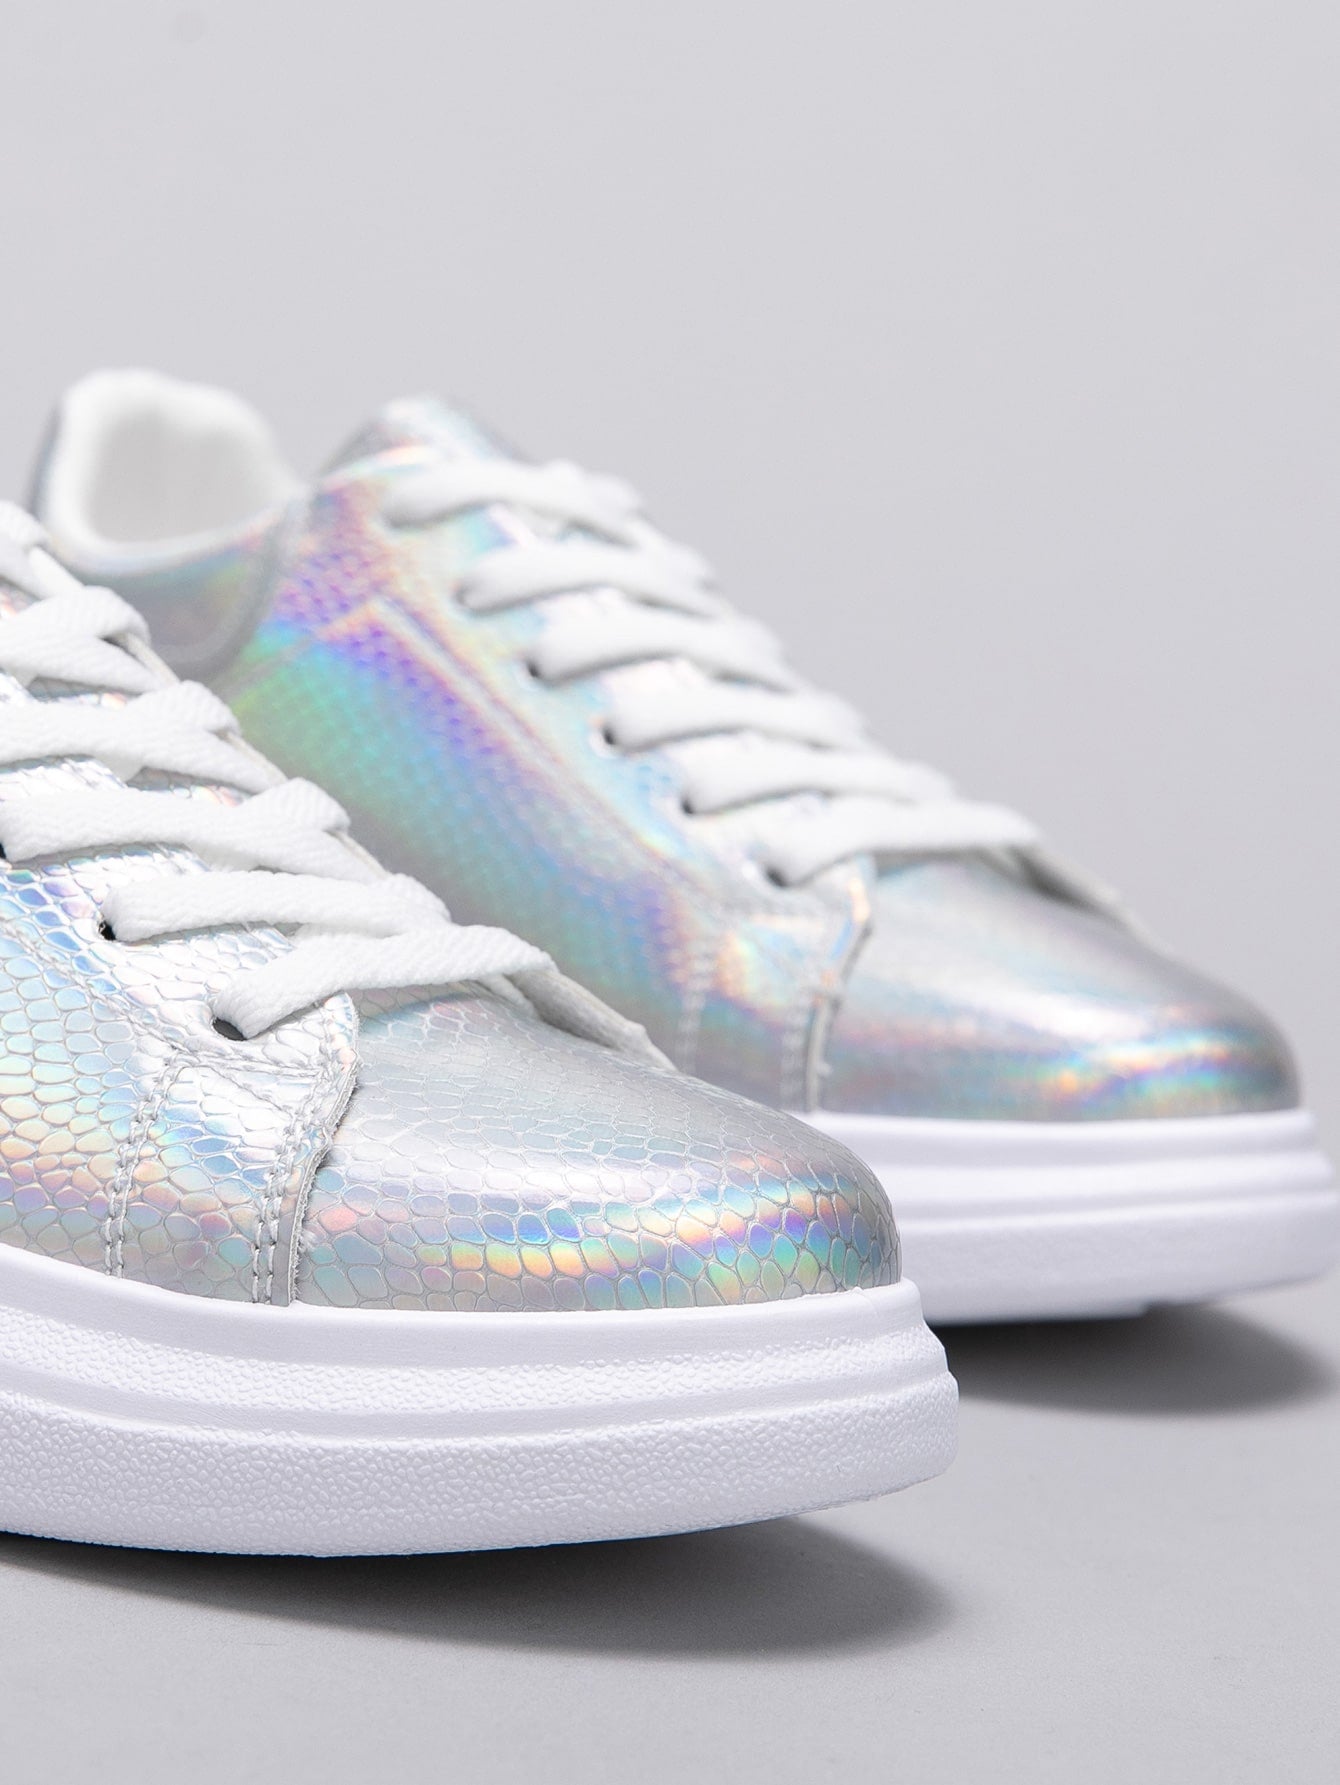 Y2K Chunky Holographic Platform Sneakers / Vintage Silver Platform Trainers  / Sheer Sole Girly Cosplay Sneakers / Sporty Street Style Shoes - Etsy  Canada